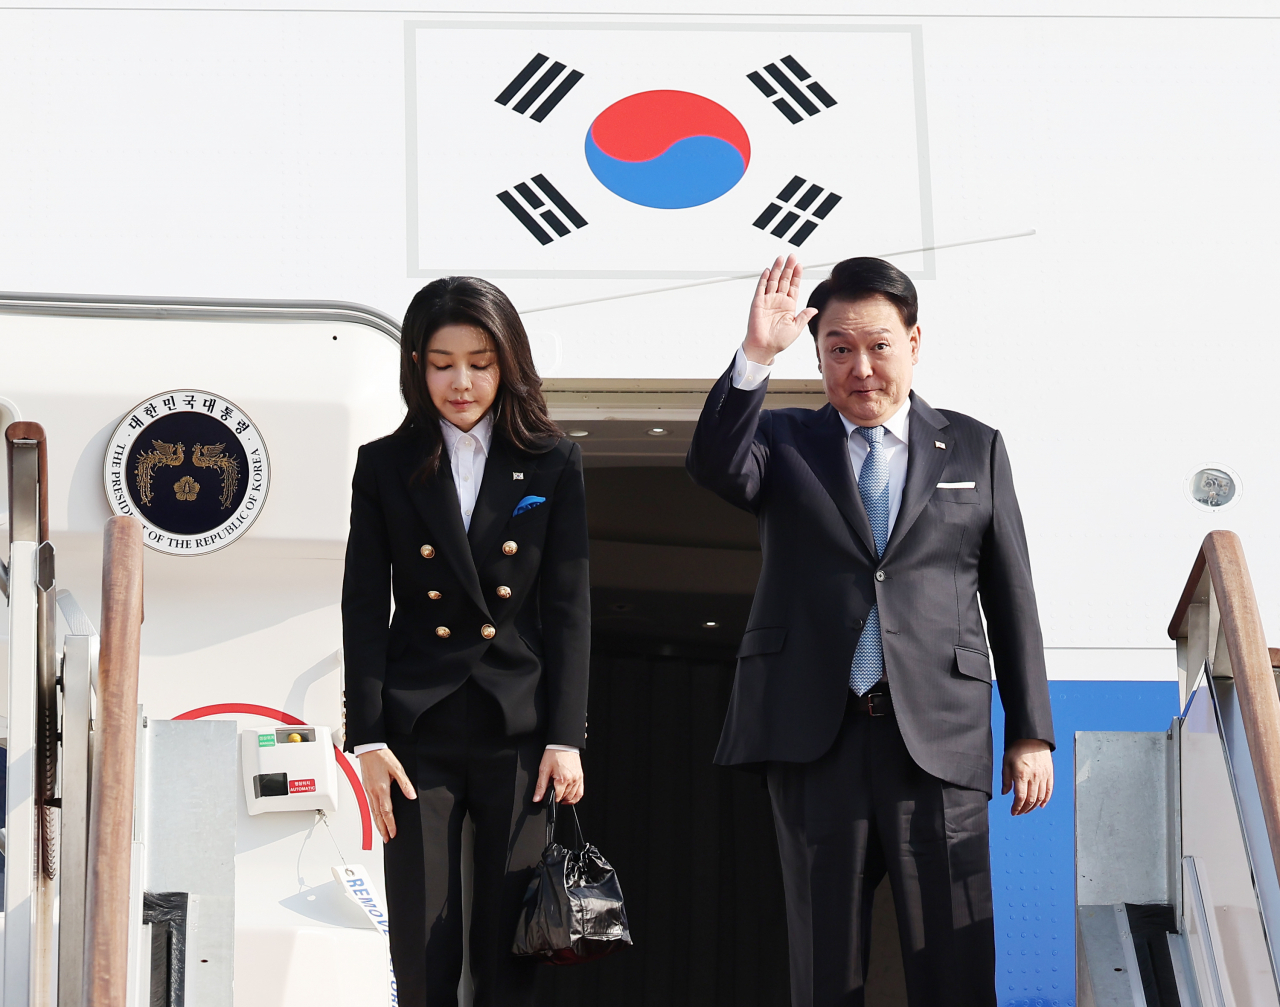 President Yoon Suk Yeol (right) and first lady Kim Keon Hee bow before boarding on Air Force One to depart for San Francisco, California at Seoul Air Base in Seongnam, Gyeonggi Province, on Thursday. (Yonhap)